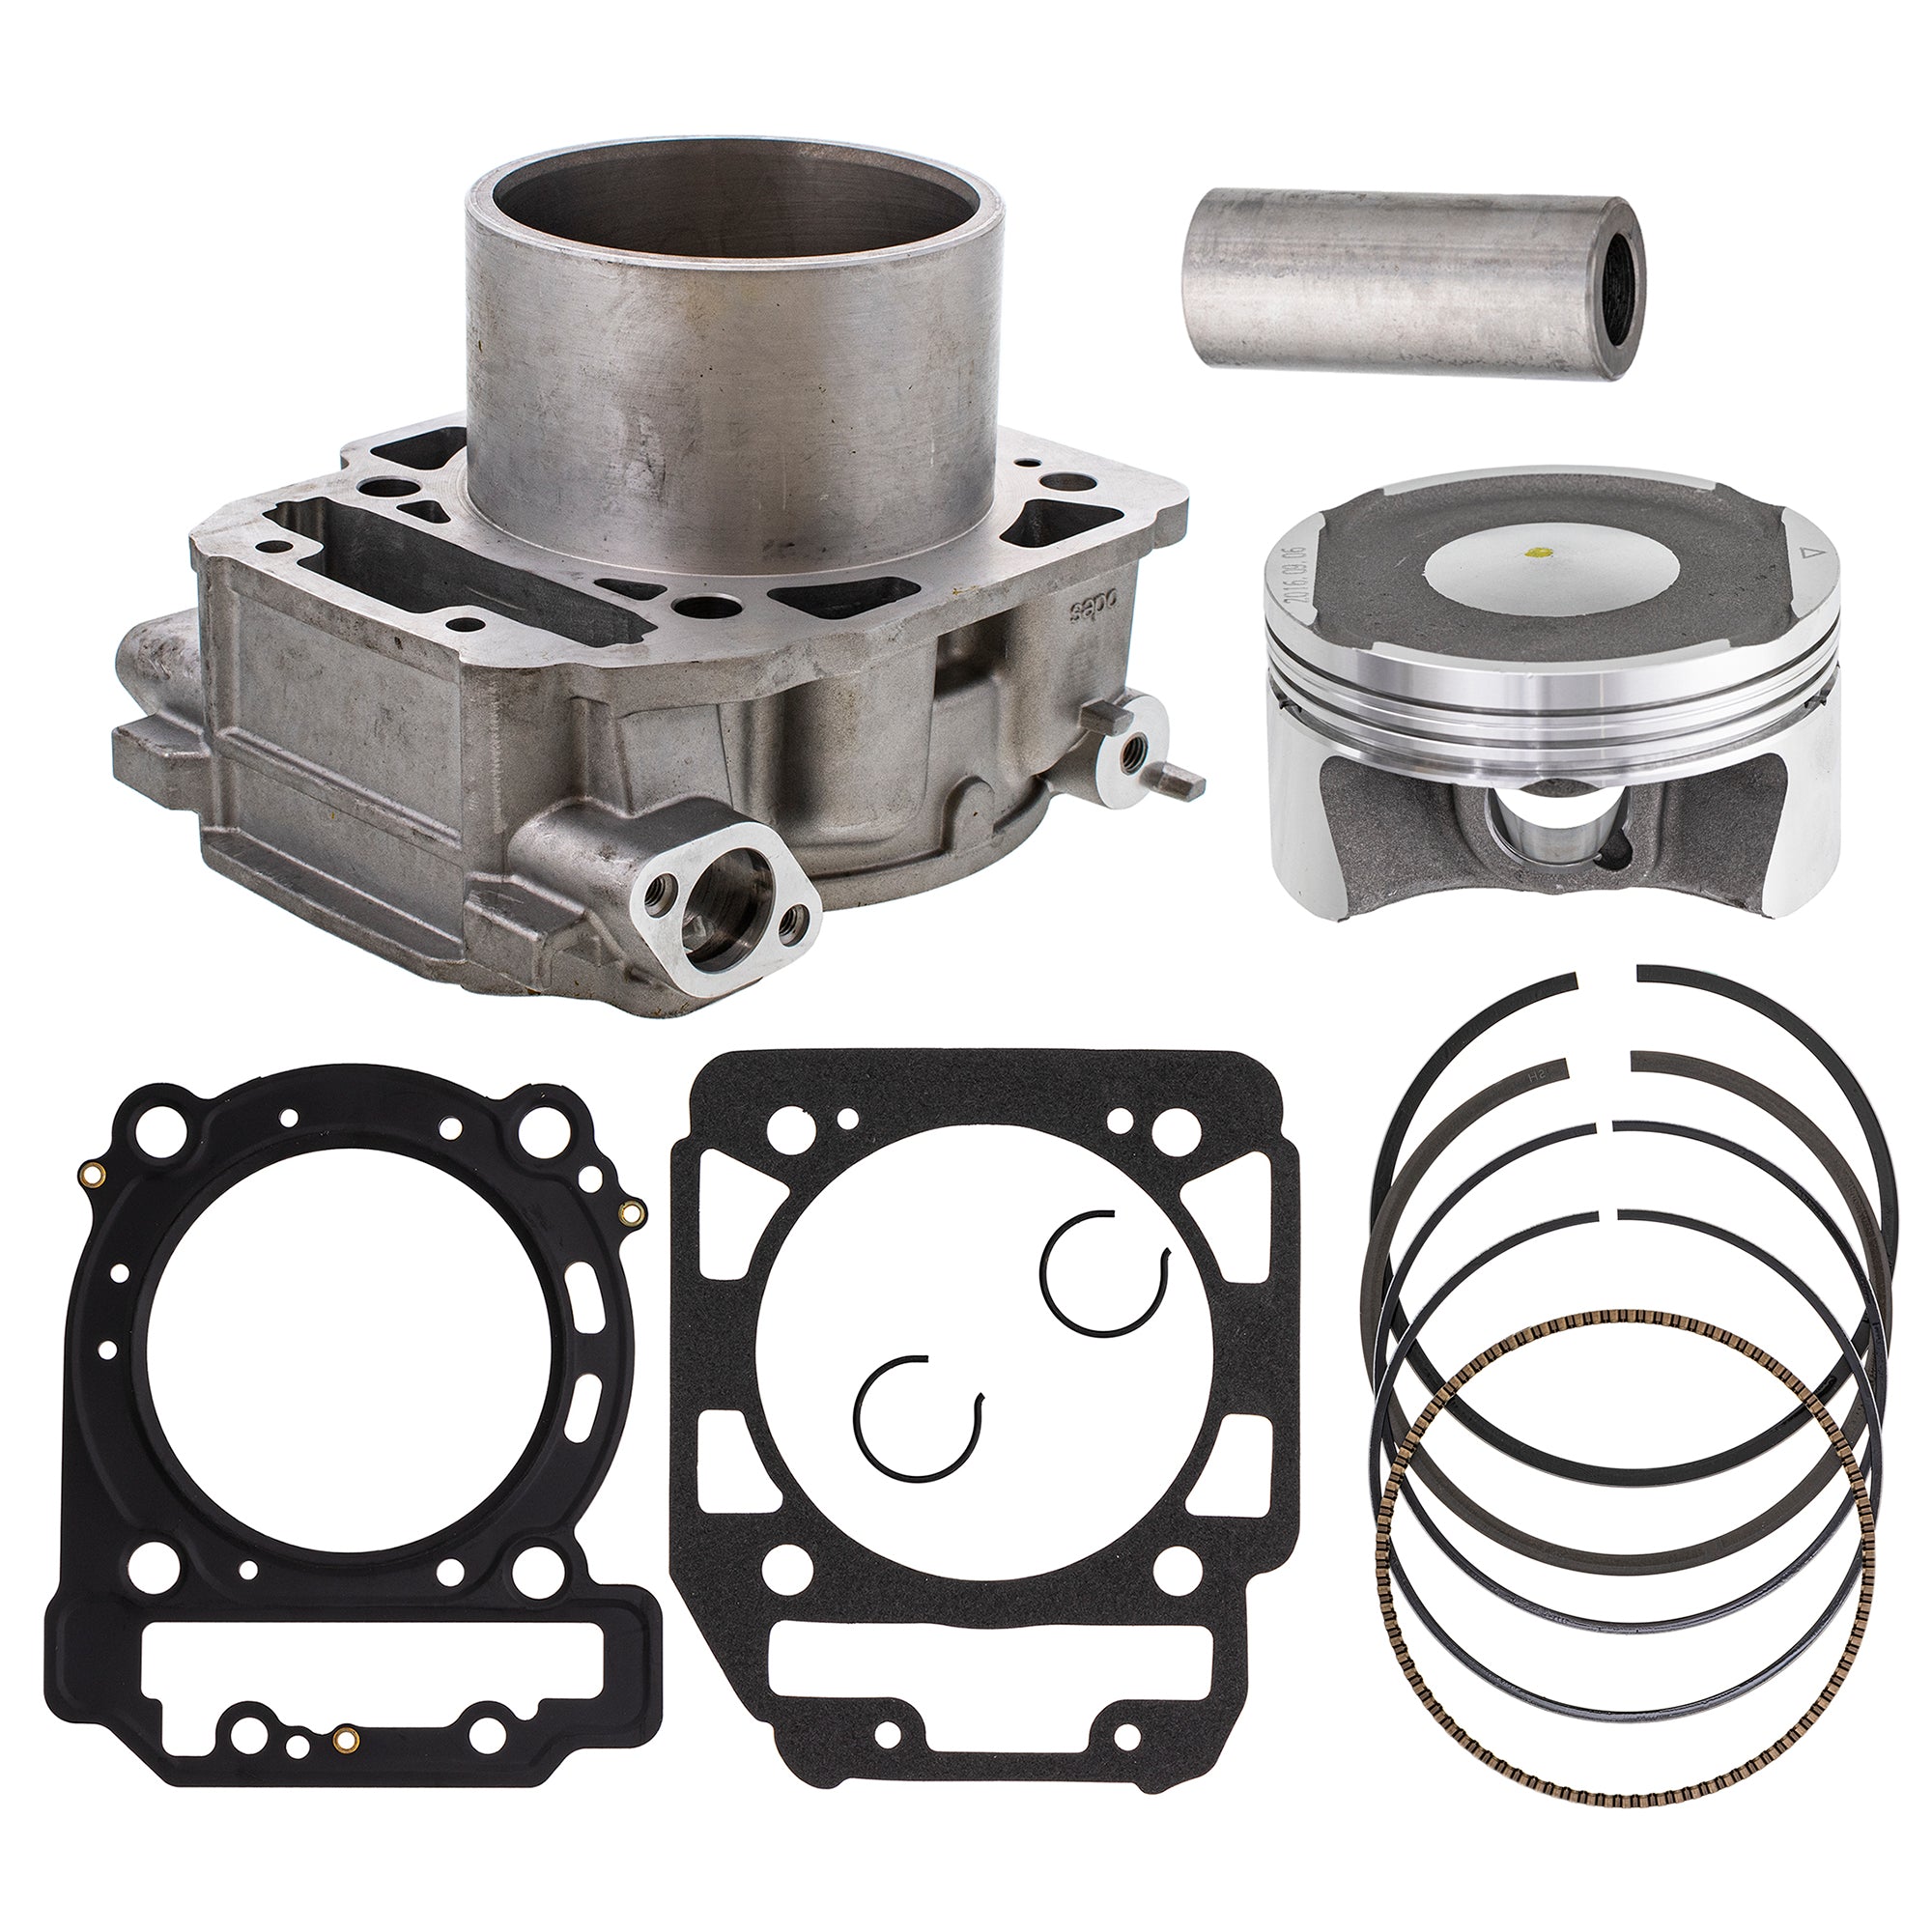 Front Cylinder Piston Kit for zOTHER BRP Can-Am Ski-Doo Sea-Doo Renegade Outlander NICHE MK1001172